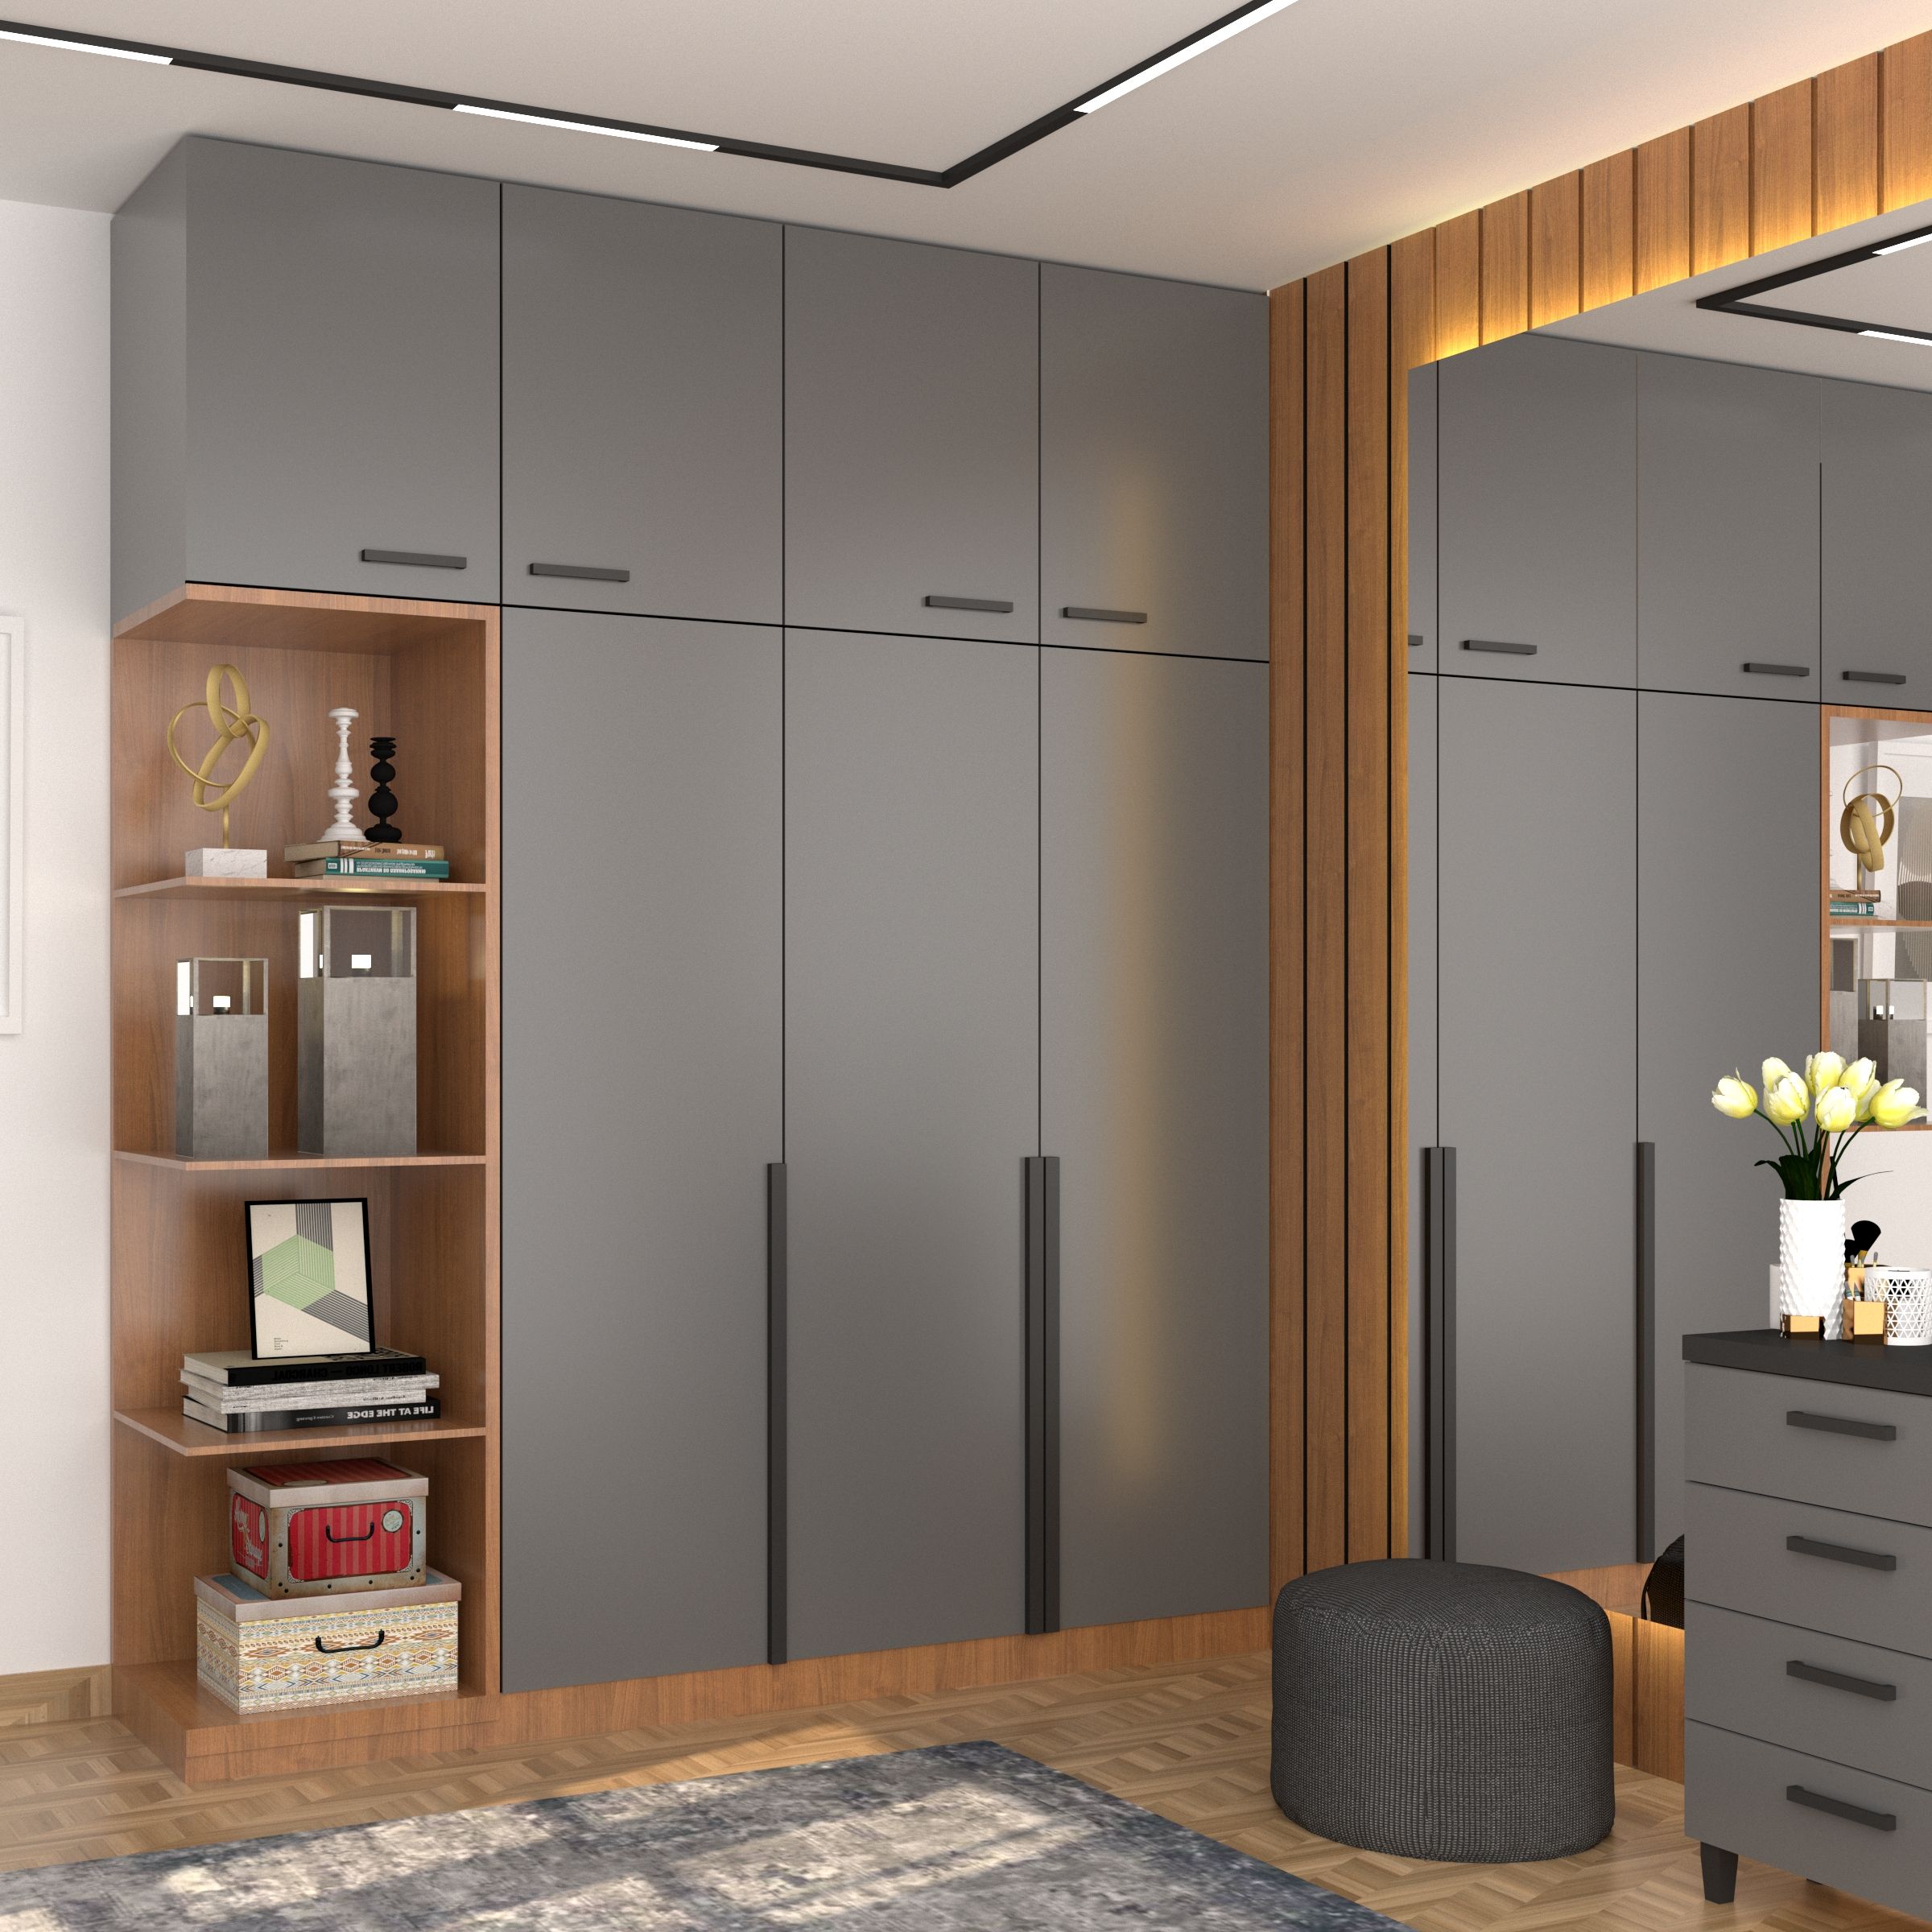 Modular Wardrobe Styled With Subtle Colour Palette